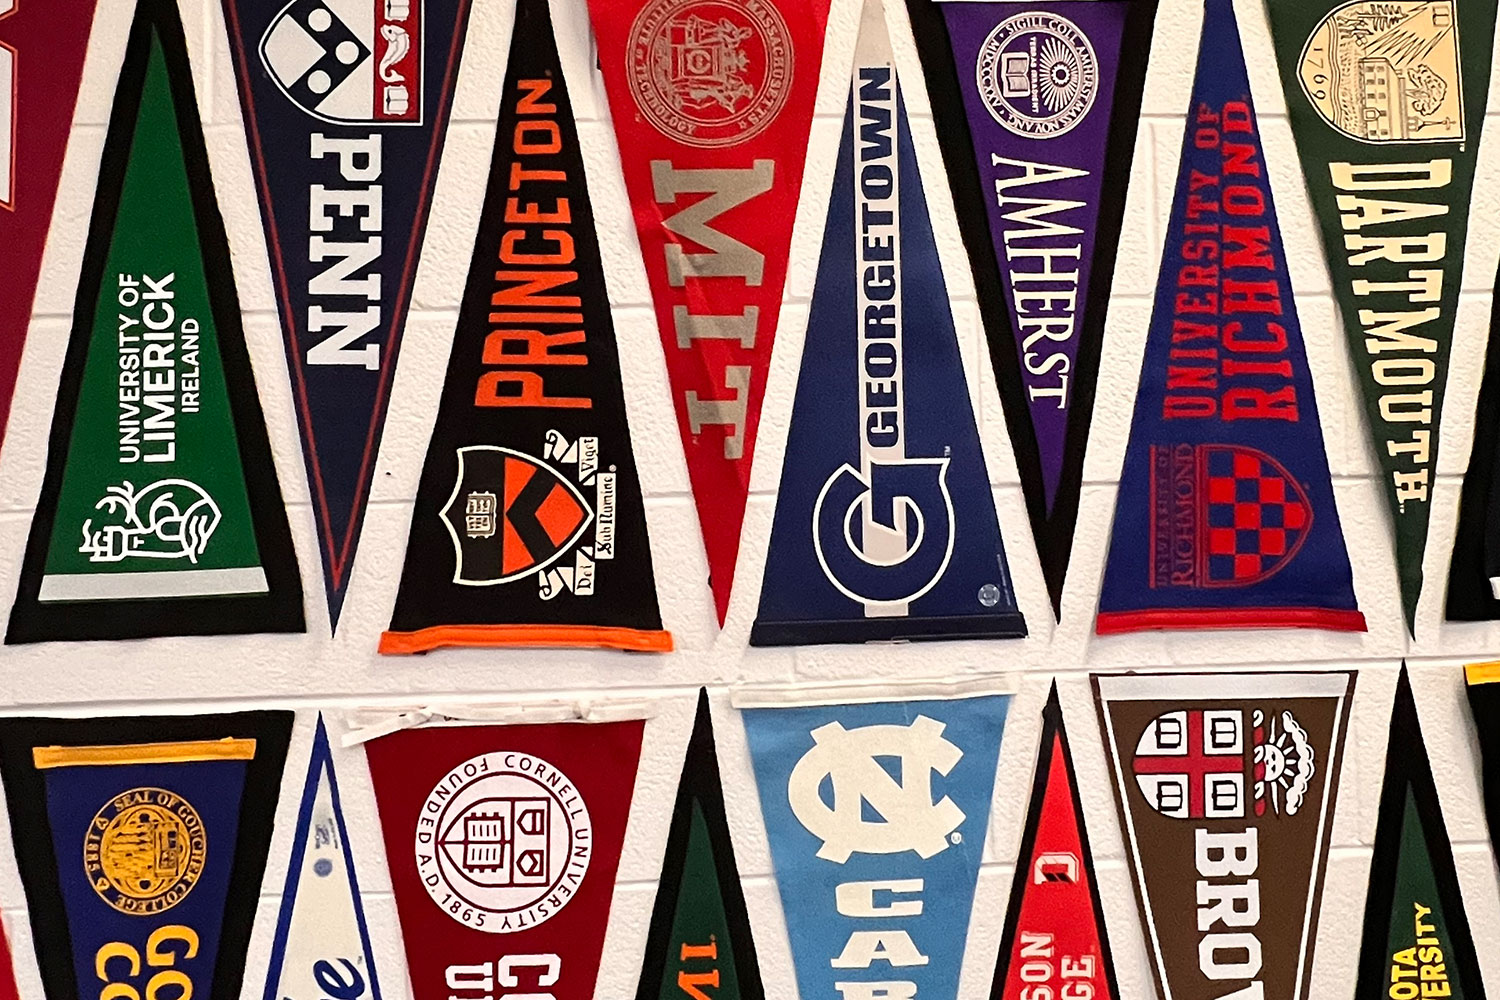 College banners hang in the Career and College Counseling office.